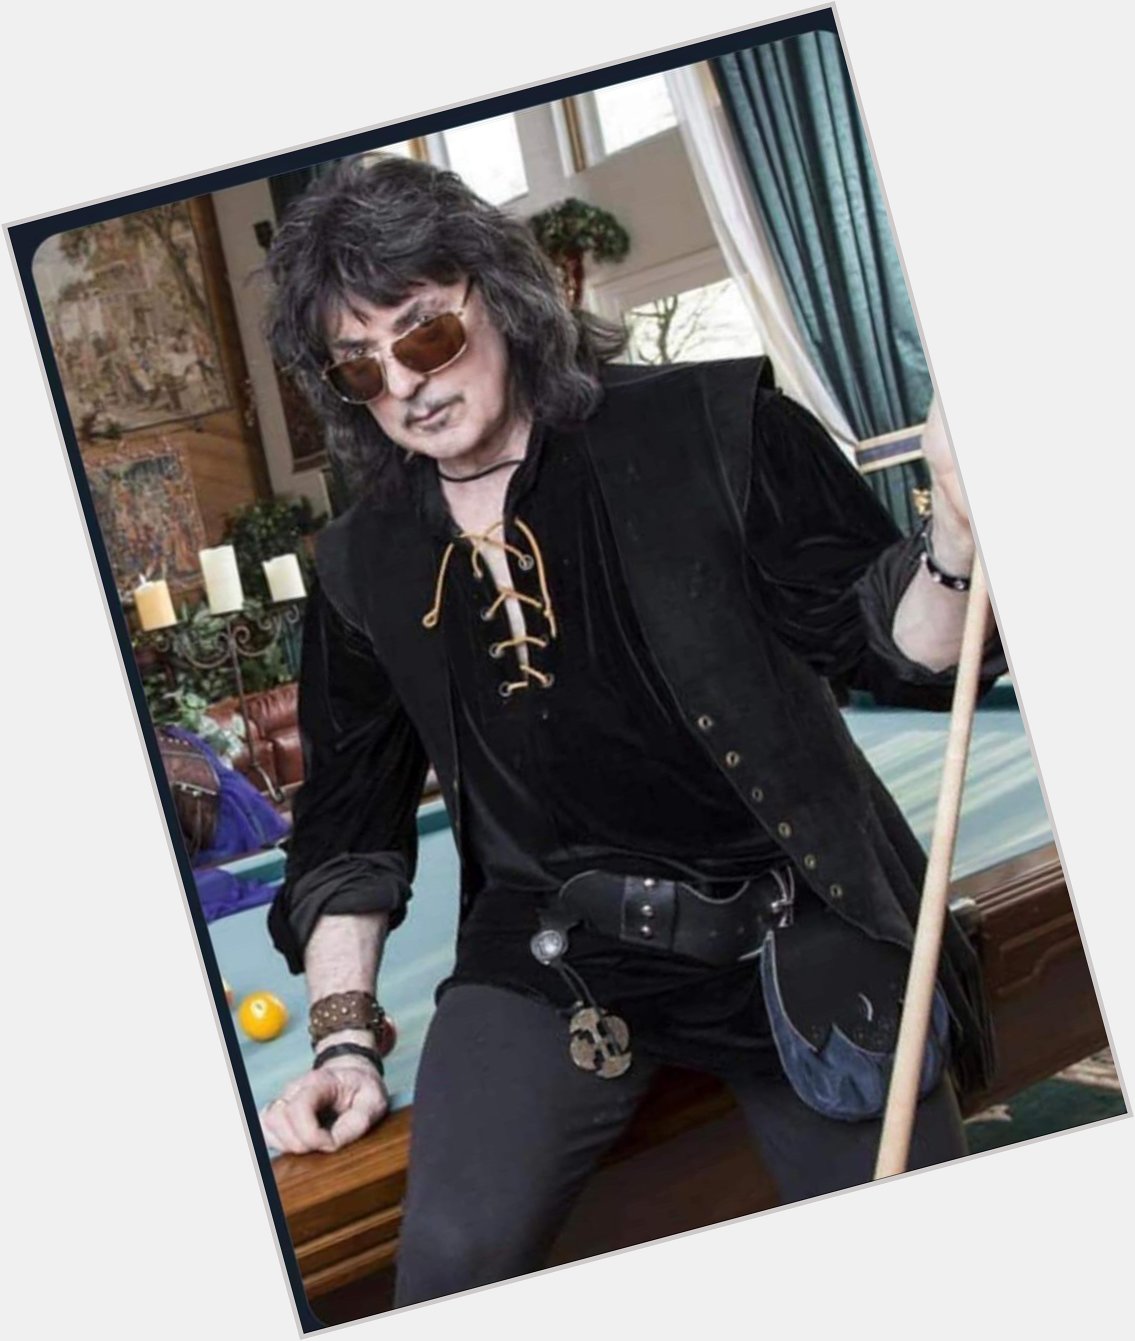 Happy belated birthday to Ritchie Blackmore, for whom every day is GaryCon apparently... 